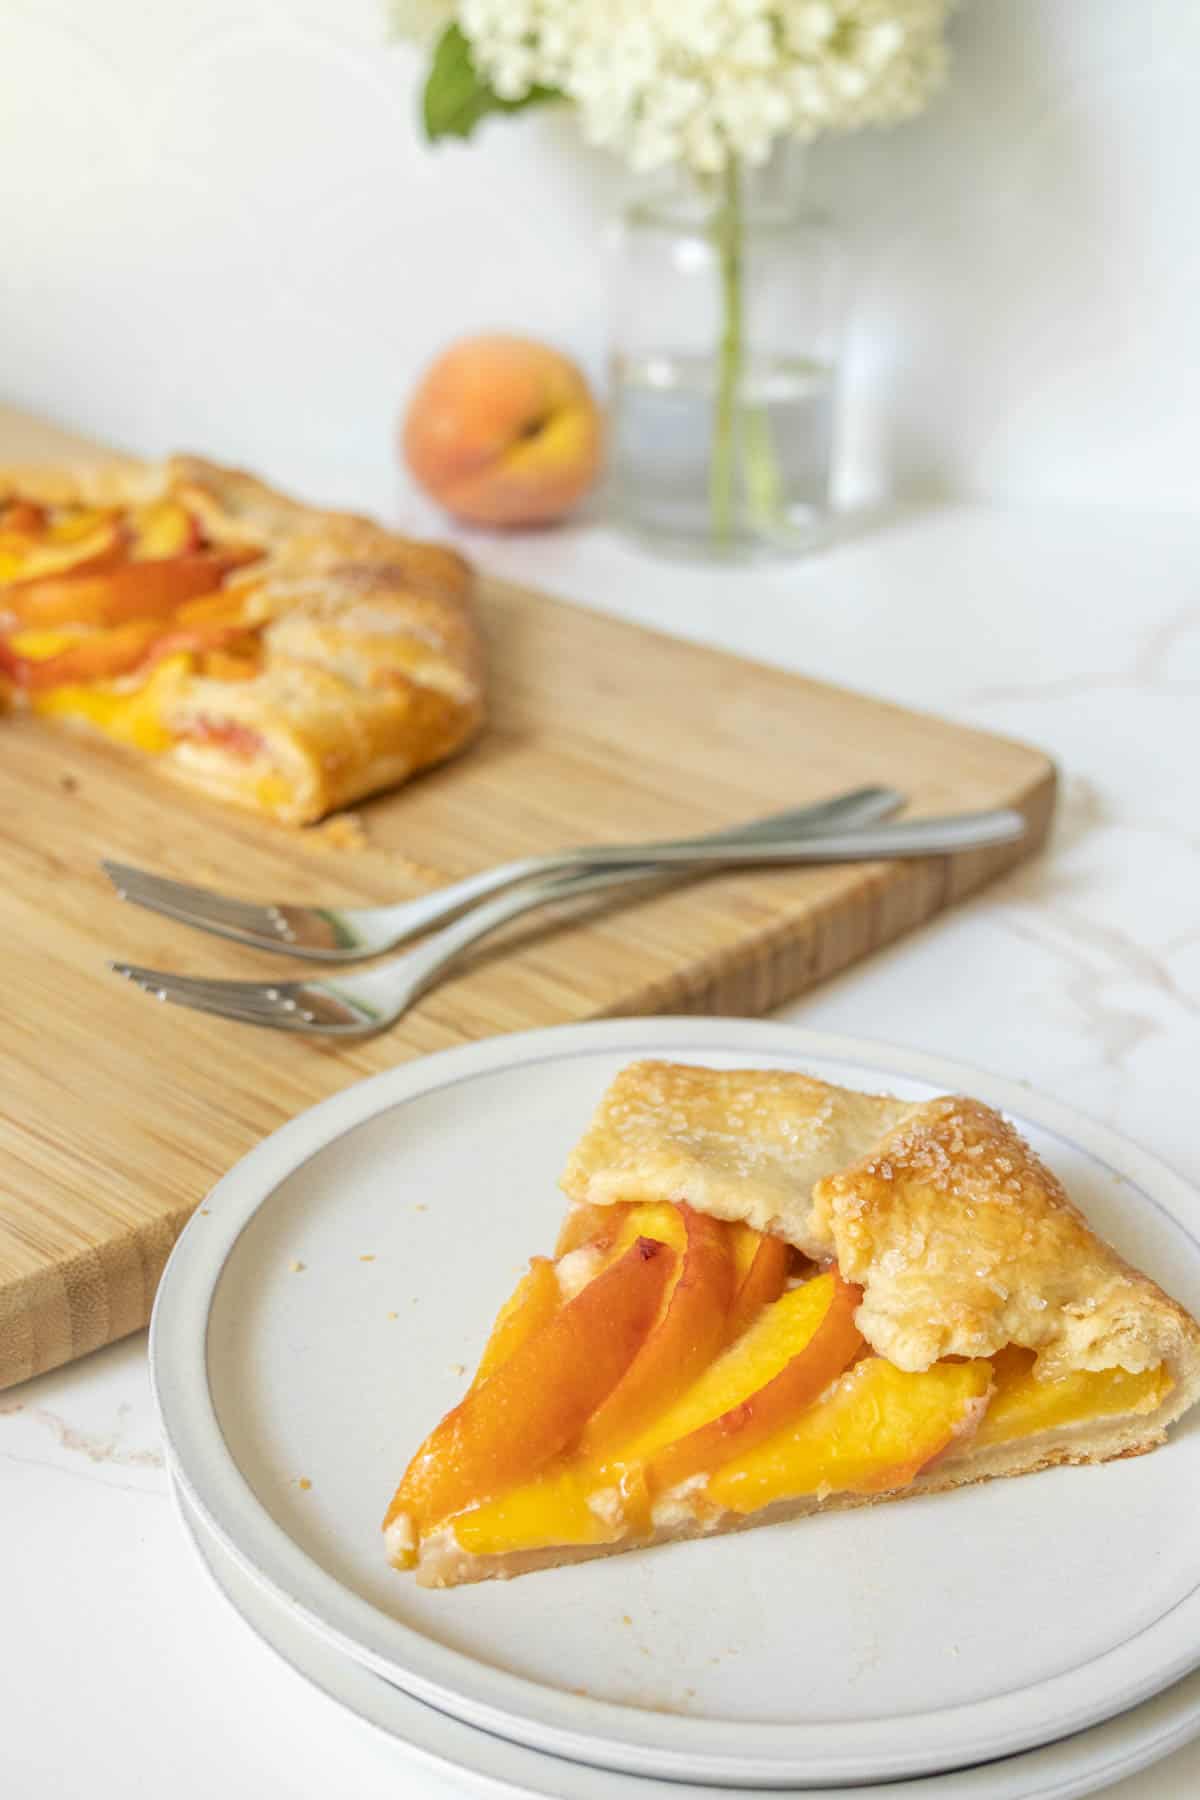 Slice of peach galette on a dessert plate with the rest of the galette behind.